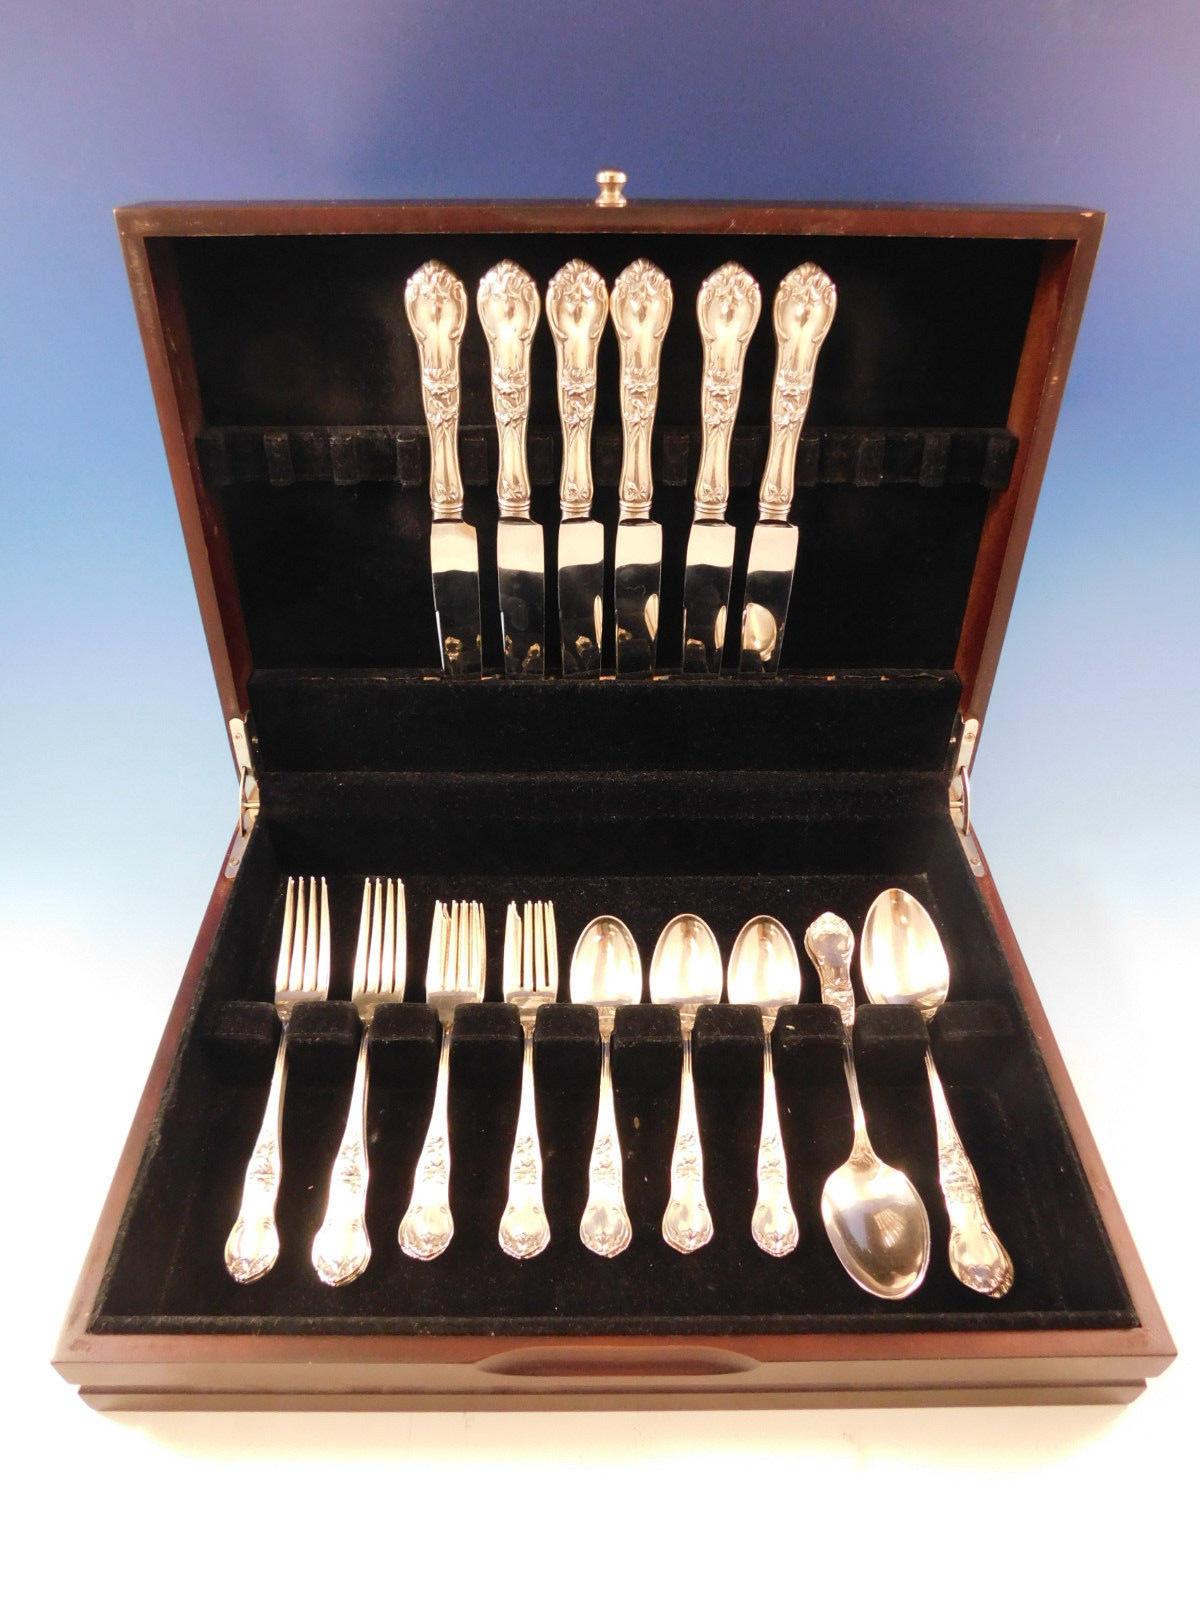 Rare Primavera by Pesa (Mexico) sterling silver flatware set circa 1925 with floral motif, 26 pieces. This set includes:

6 knives, 9 1/2